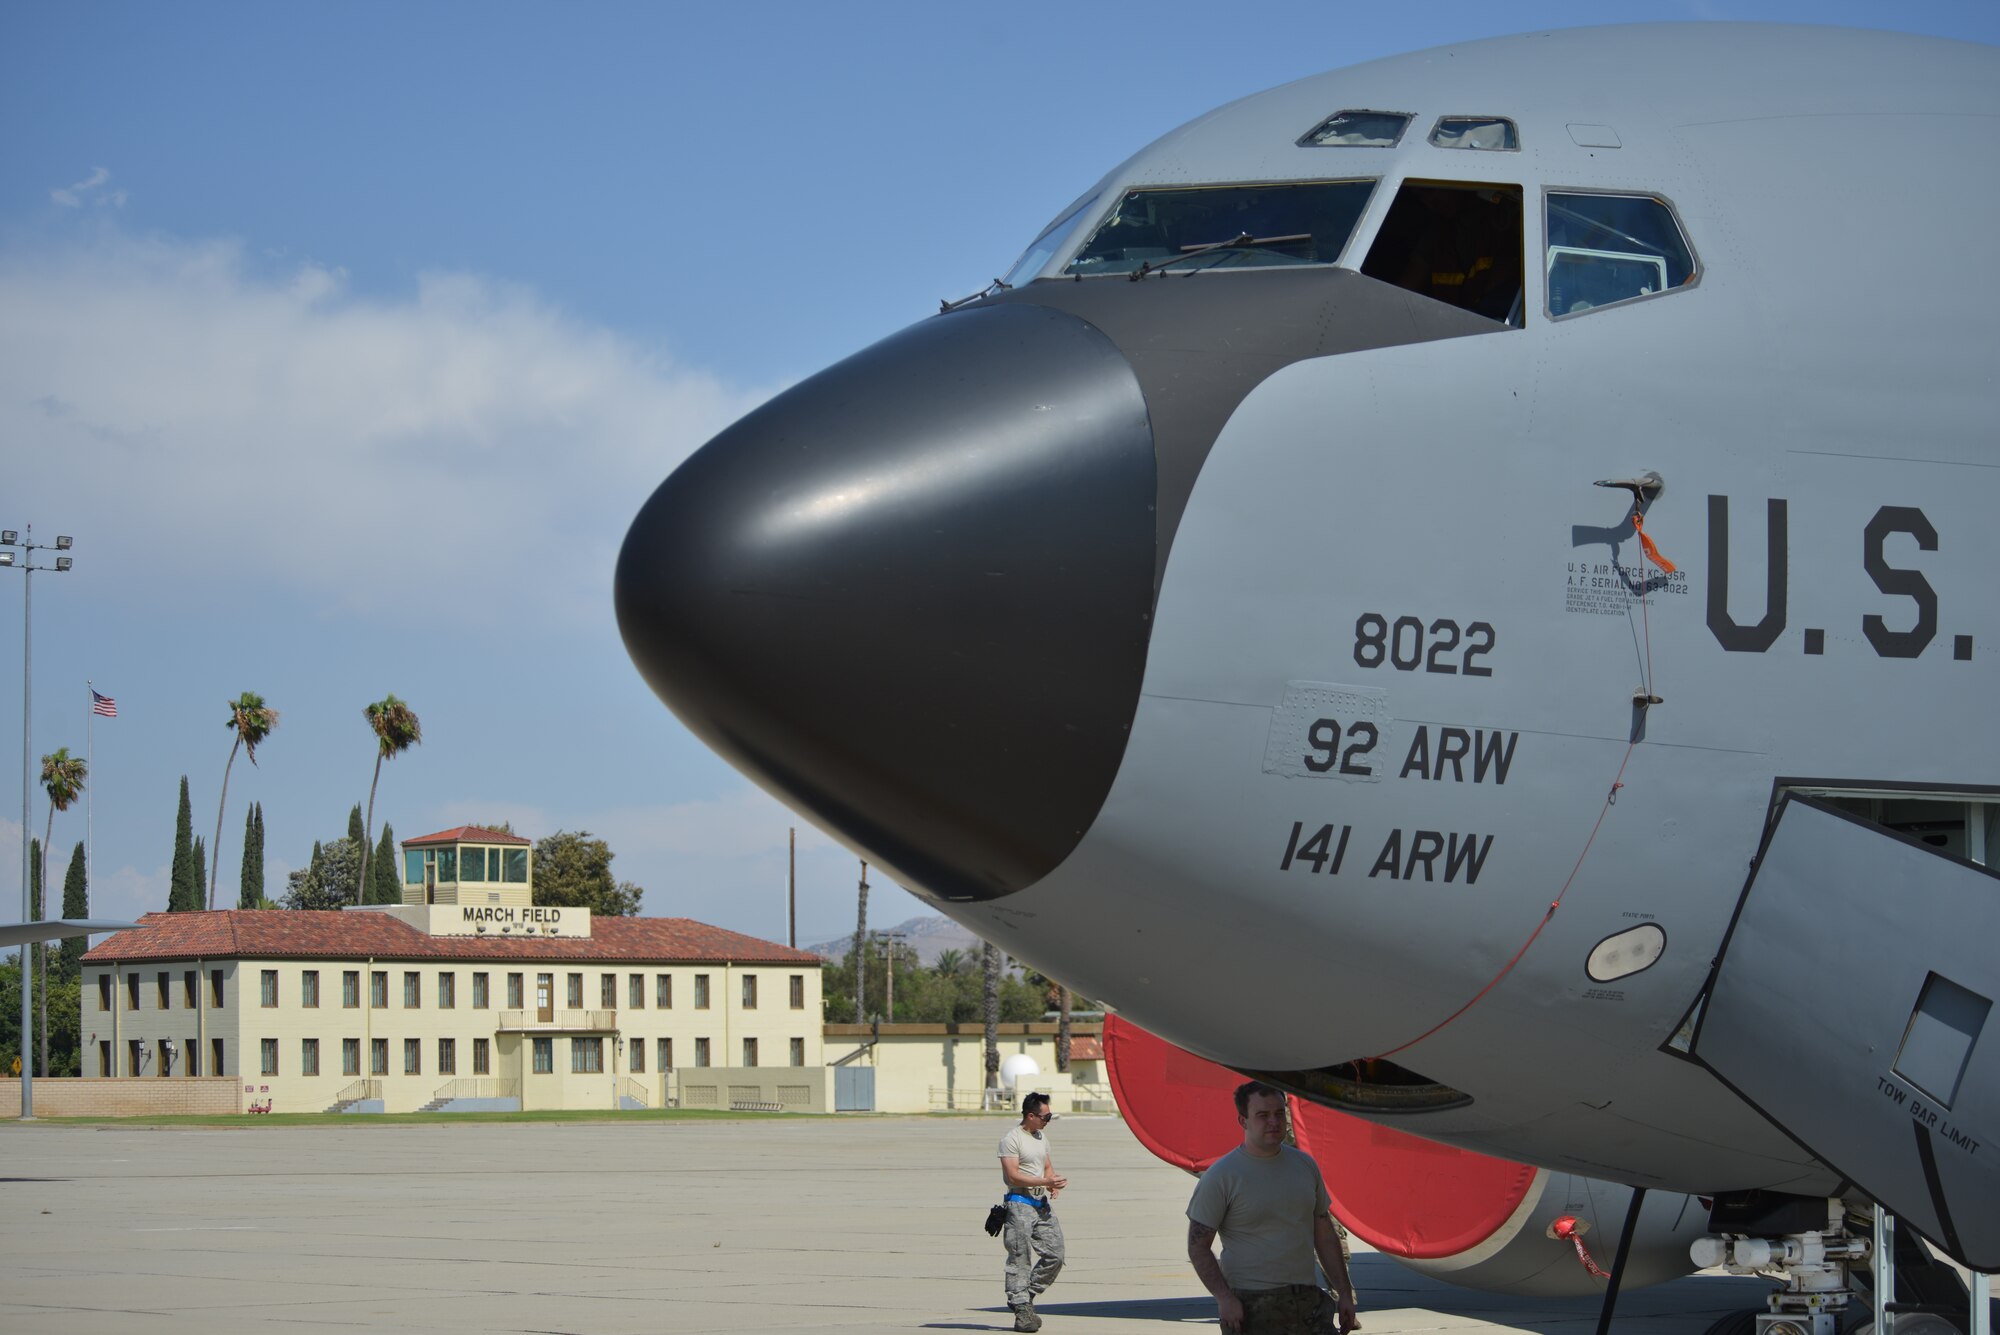 Airmen from Fairchild Air Force Base, Washington, prepare a KC-135 Stratotanker for its stay at March Air Reserve Base, California, Sept. 4, 2019. Due to the number of aircraft at Fairchild during the Mobility Guardian 2019 exercise, the 92nd Air Refueling Wing sent a dozen of their tankers to March ARB to continue training and meeting global taskings.
(U.S. Air Force photo by Airman 1st Class Ryan Gomez)